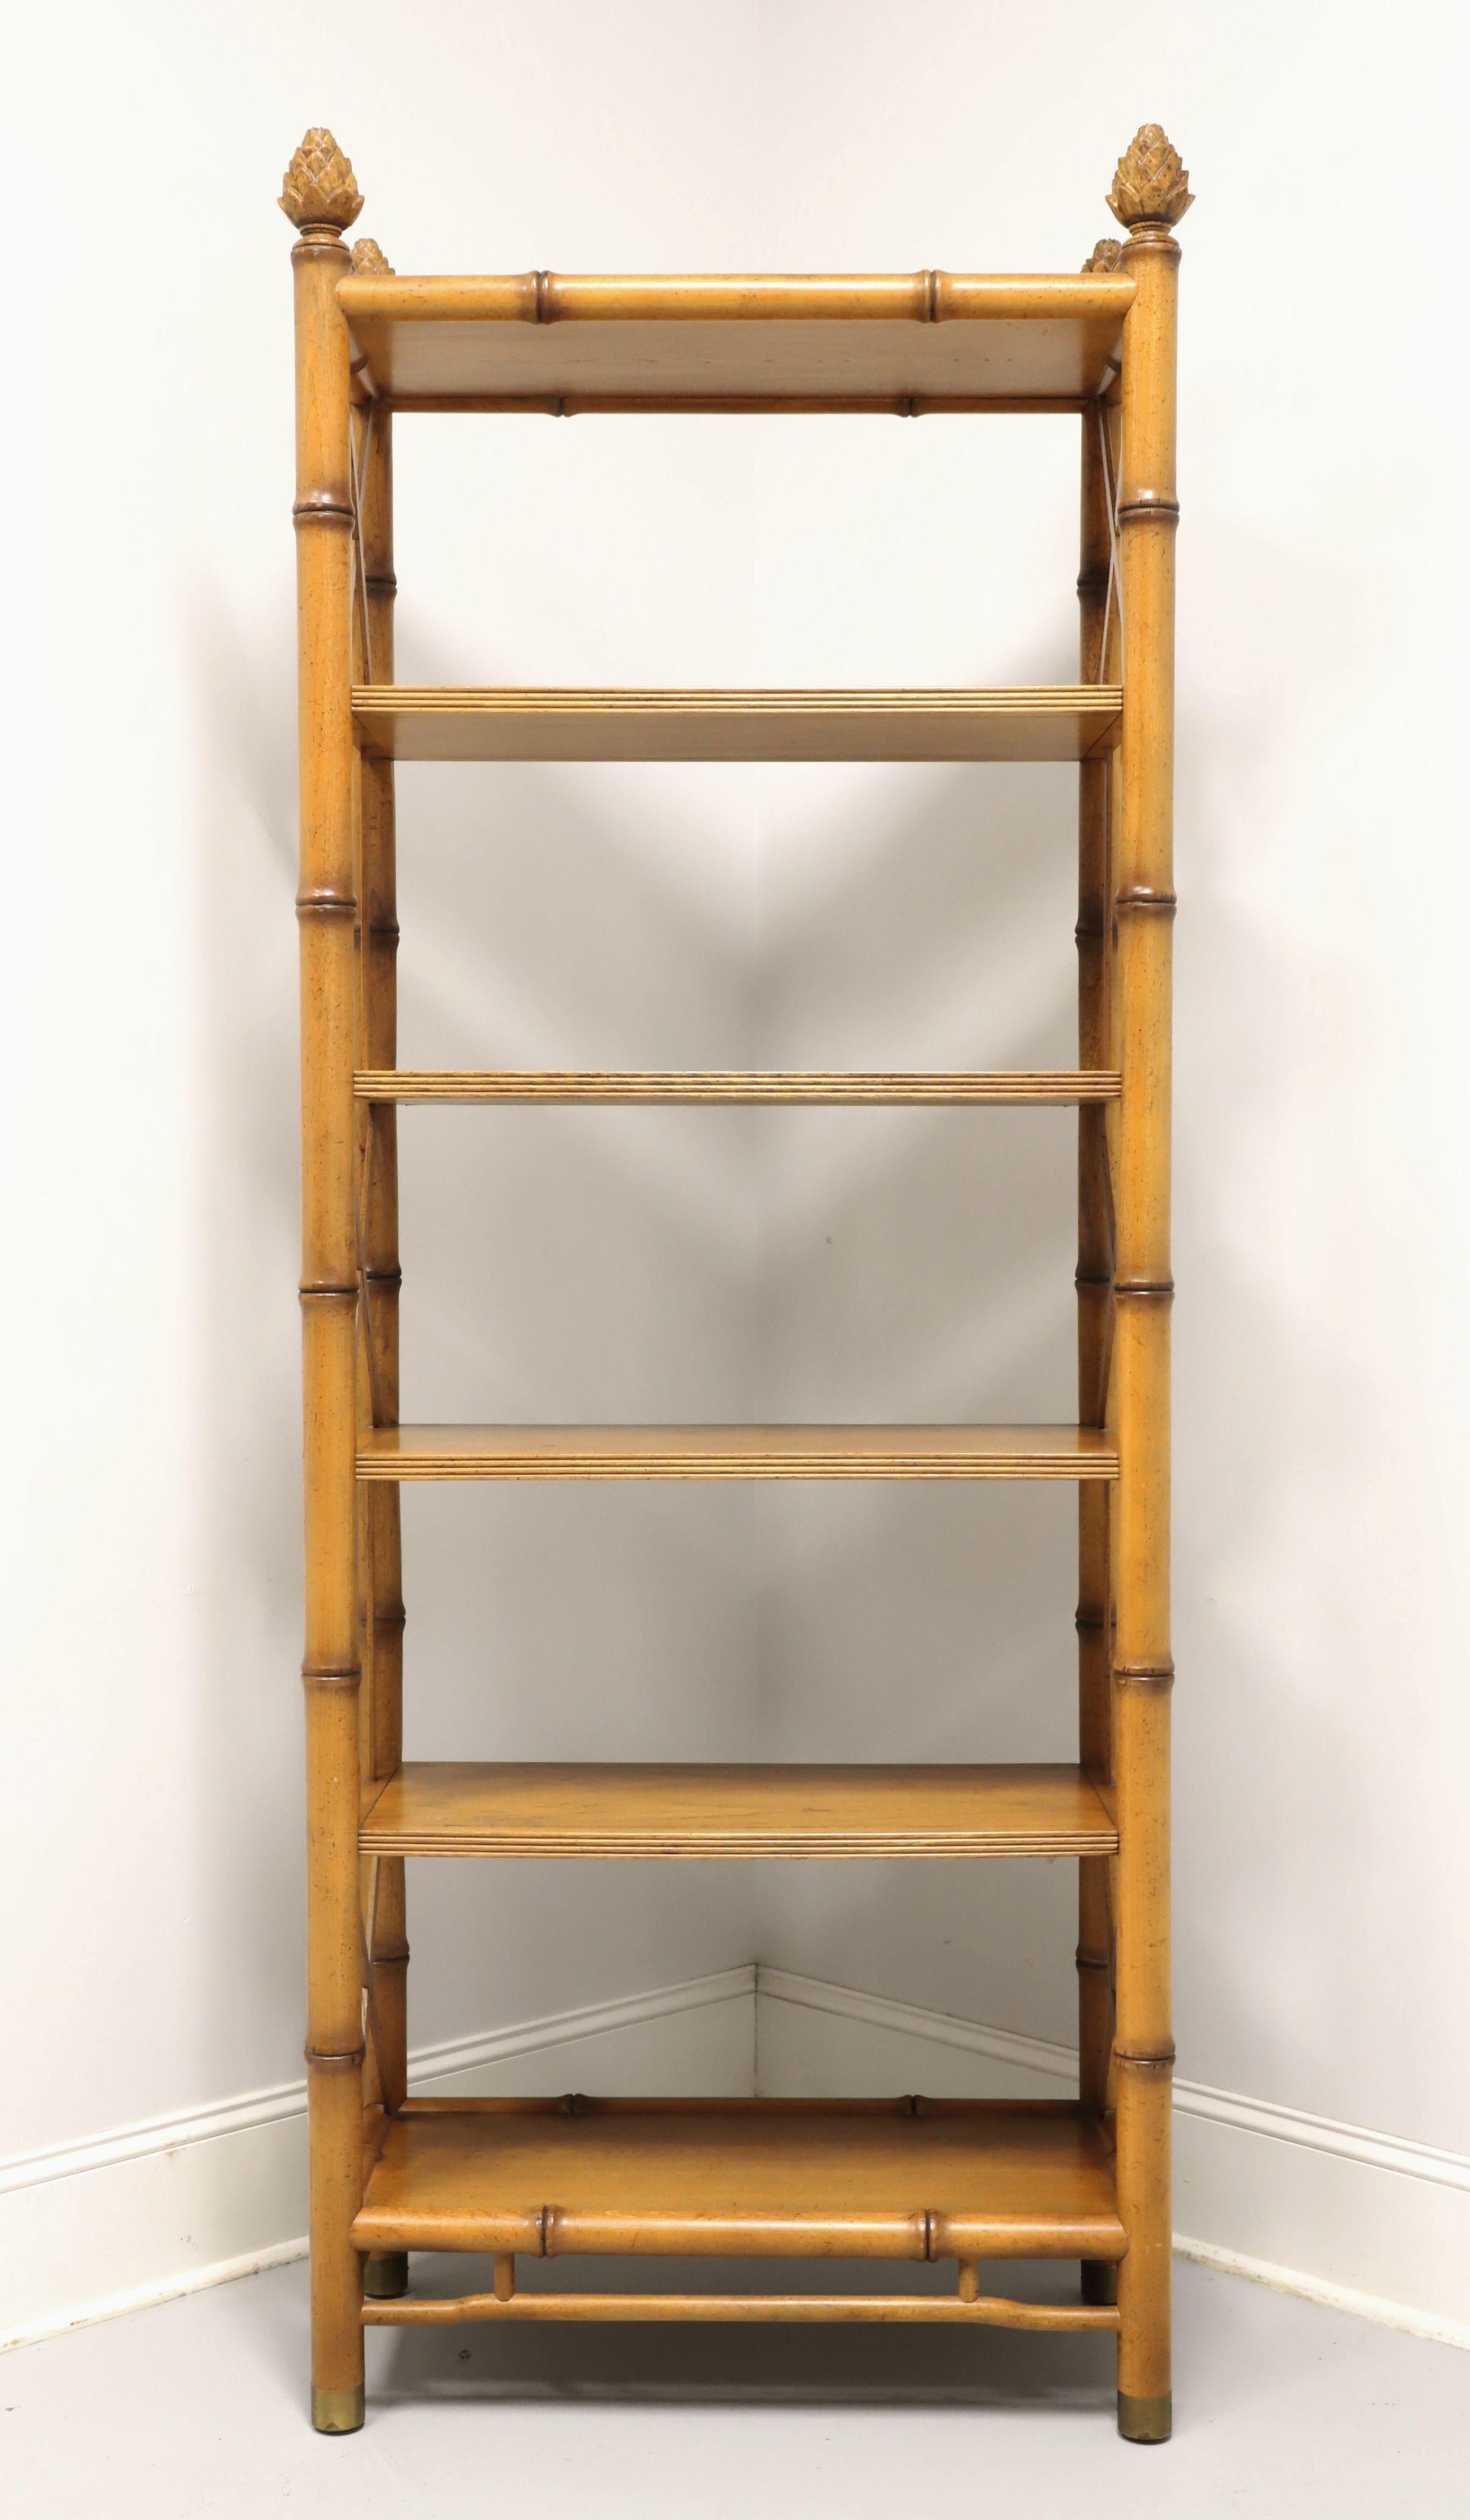 A Hollywood Regency style etagere / display shelving unit by Baker Furniture. Light color stained walnut, ornamental faux bamboo, decorative open frame, alternating per shelf straight 